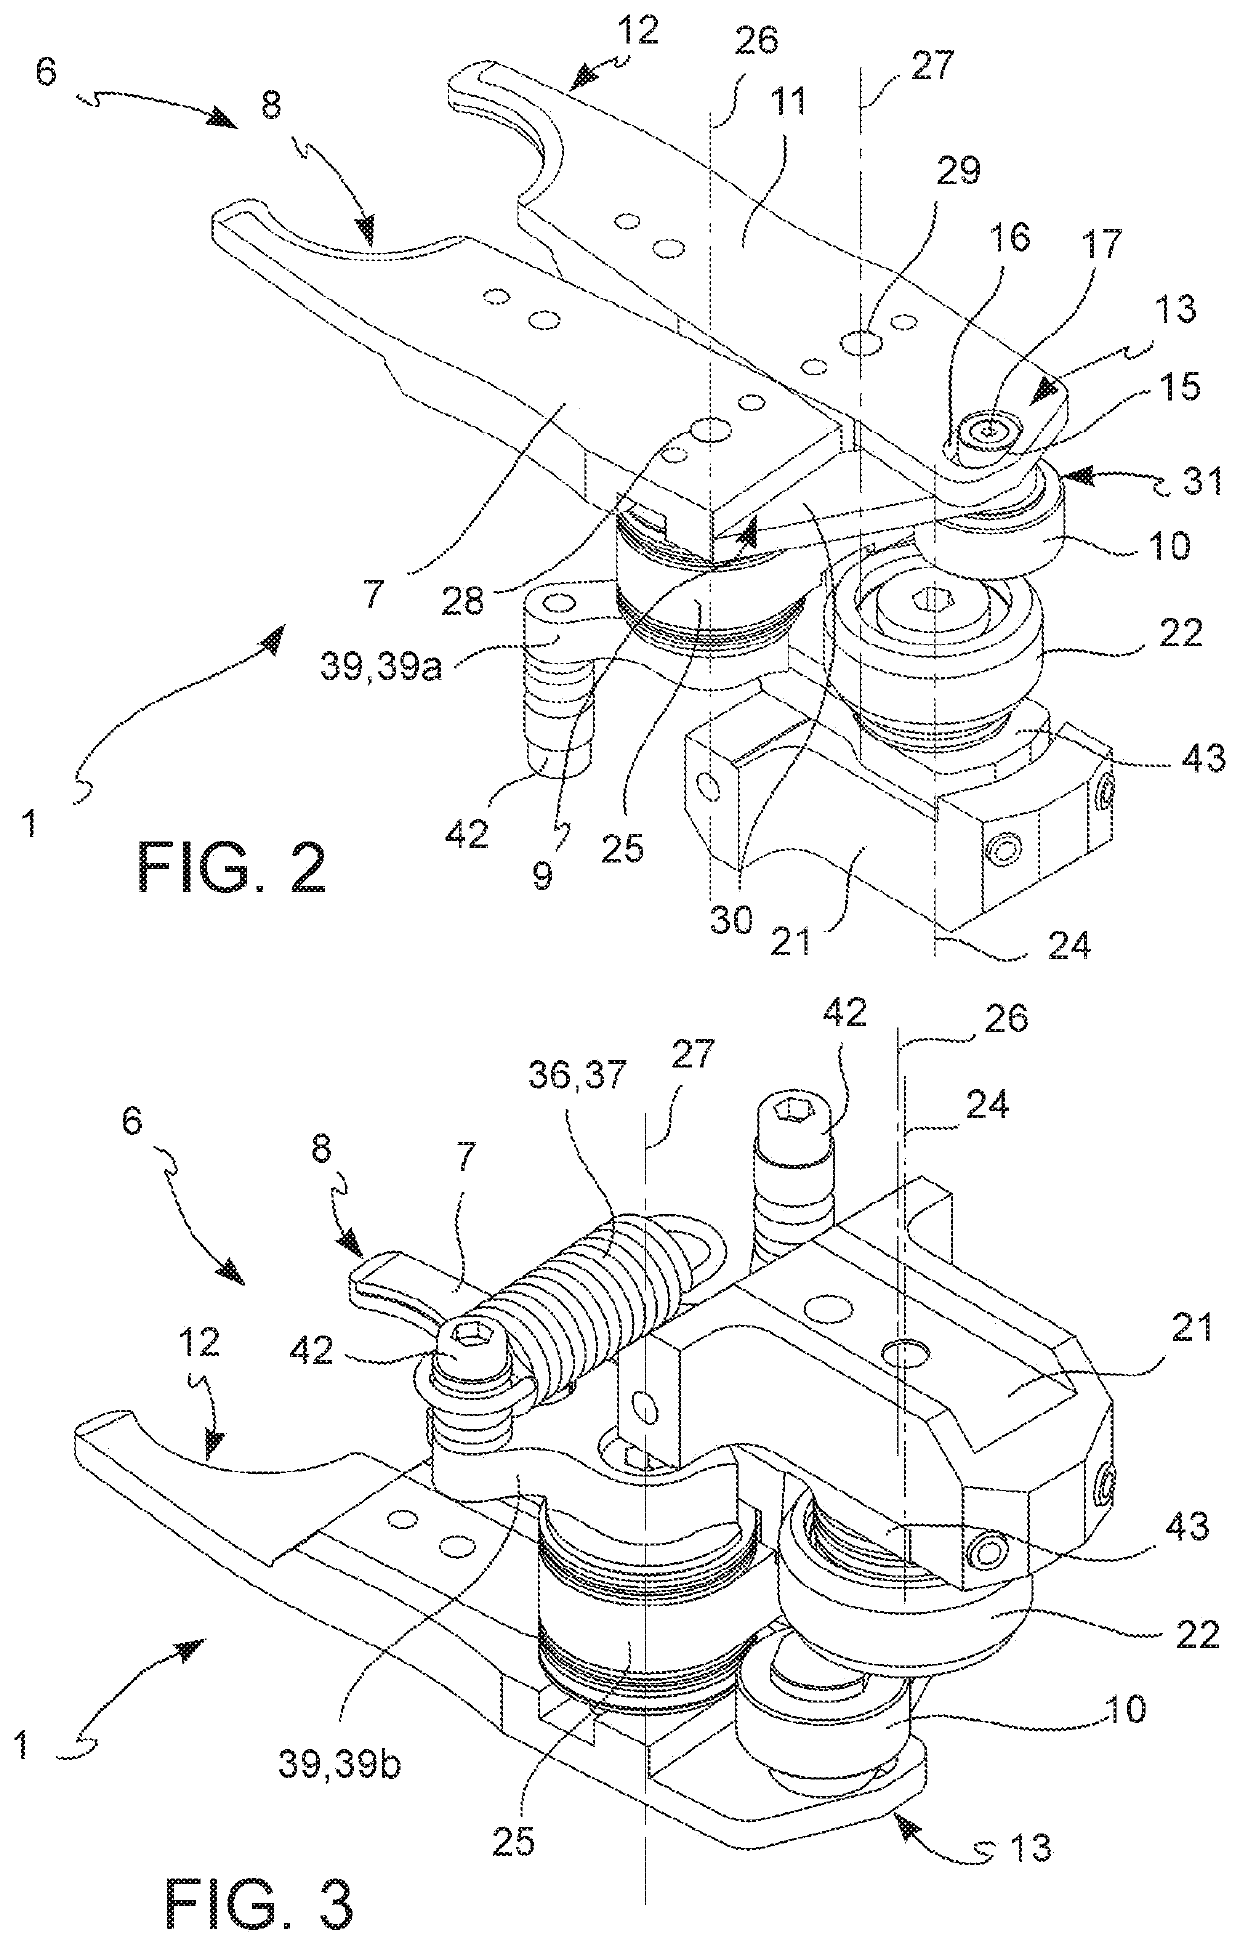 Handling device for containers provided with clamps for opening on command